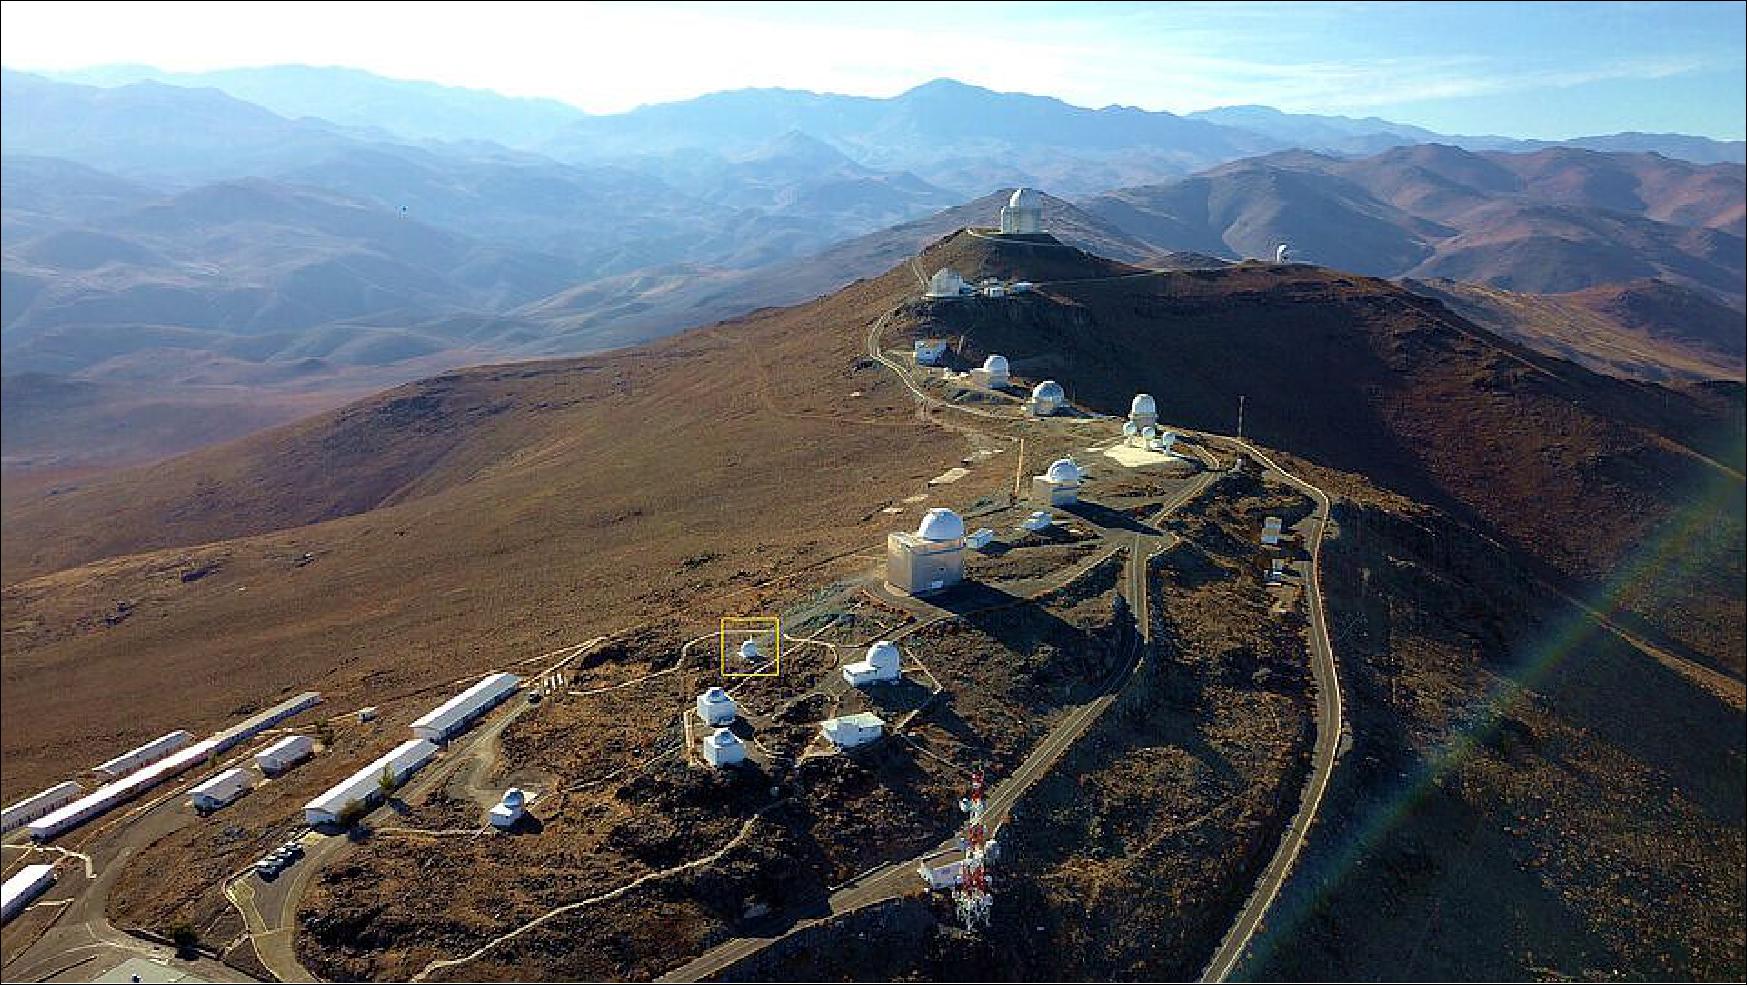 Figure 11: The position of ESA's Test-Bed Telescope 2 is indicated by the yellow square in this aerial view of ESO’s La Silla Observatory, situated in the Chilean Atacama Desert. La Silla is the first ESO observatory, inaugurated in 1969, and is one of the largest in the Southern Hemisphere. It is home to a variety of telescopes including three major optical and near-infrared telescopes operated by ESO (image credit: I. Saviane/ESO)